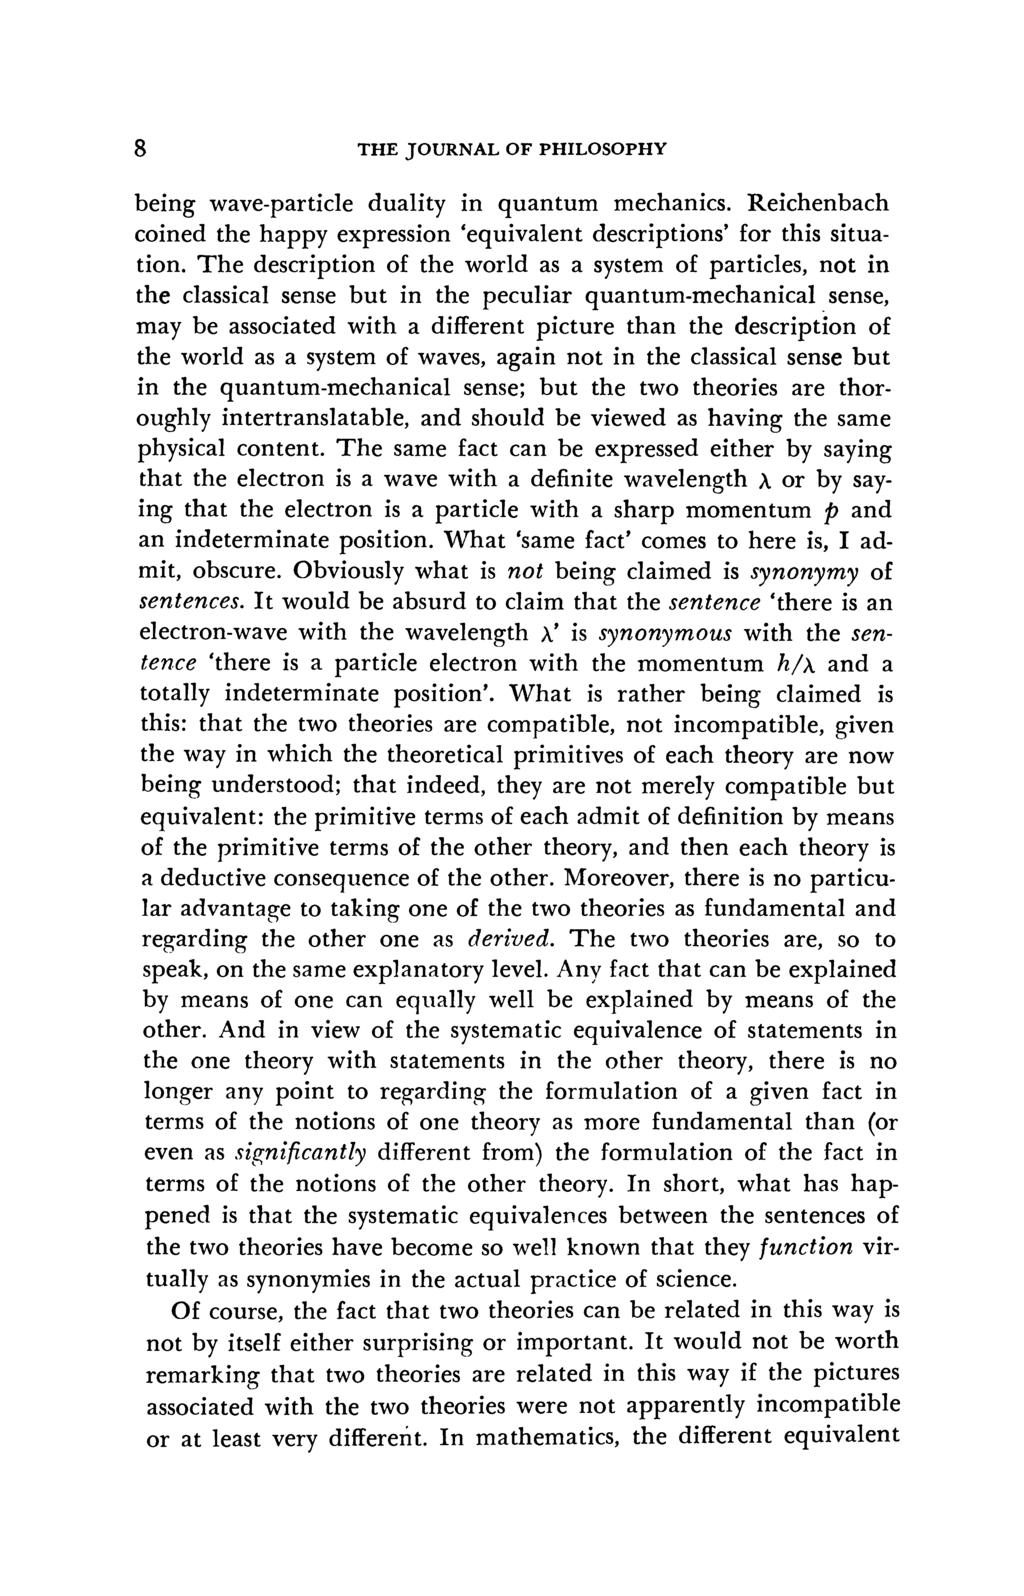 8 THE JOURNAL OF PHILOSOPHY being wave-particle duality in quantum mechanics. Reichenbach coined the happy expression 'equivalent descriptions' for this situation.